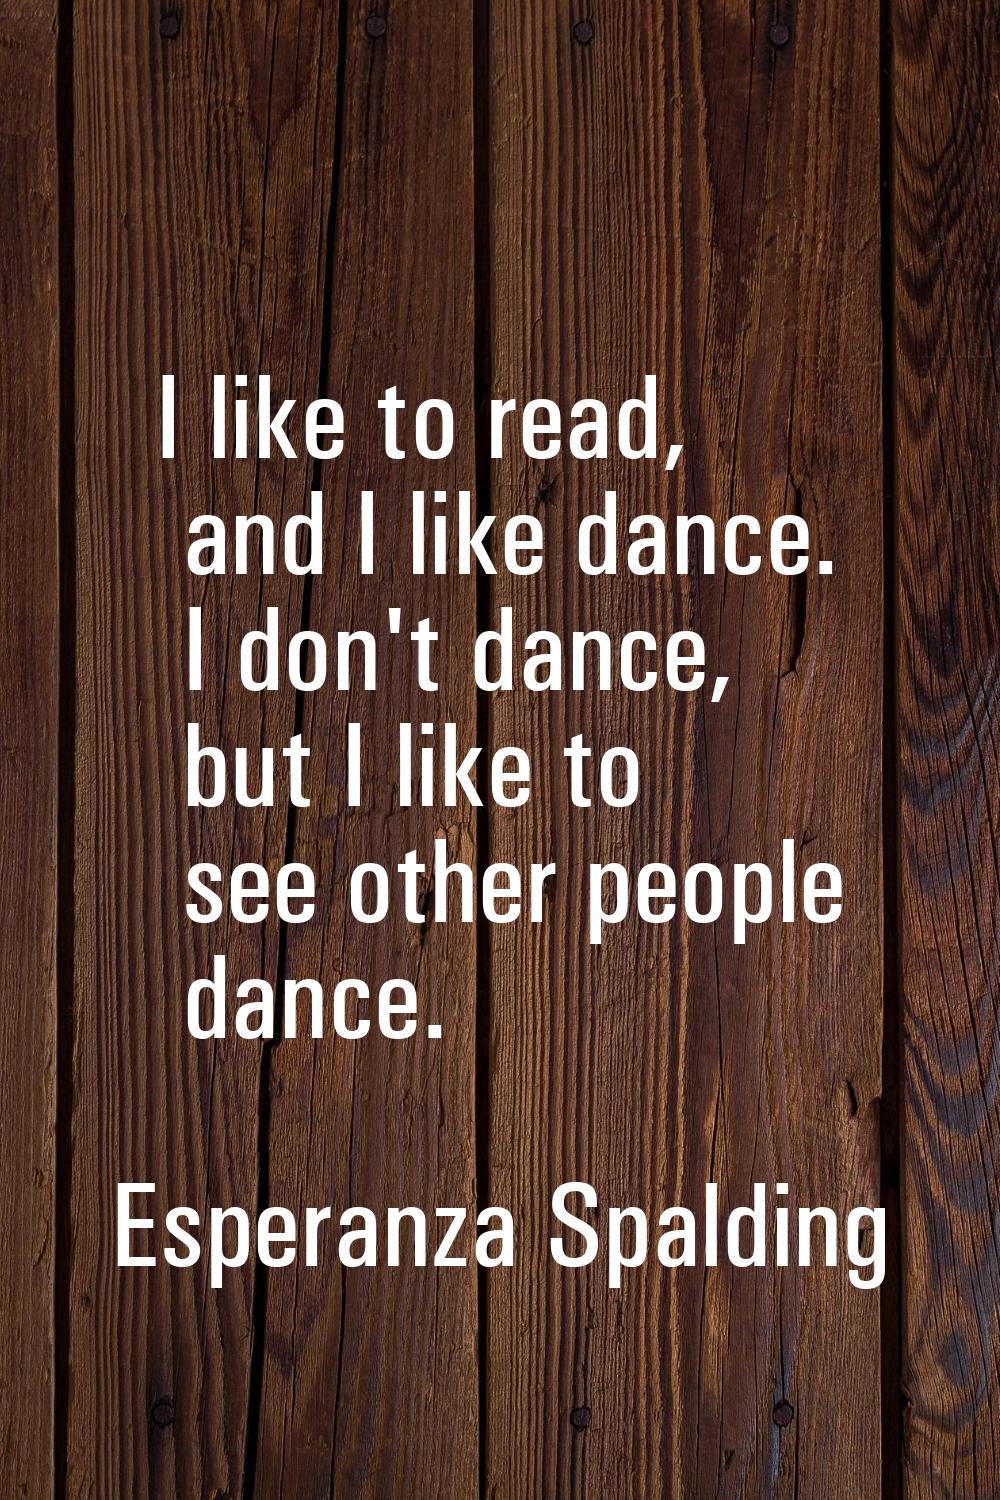 I like to read, and I like dance. I don't dance, but I like to see other people dance.